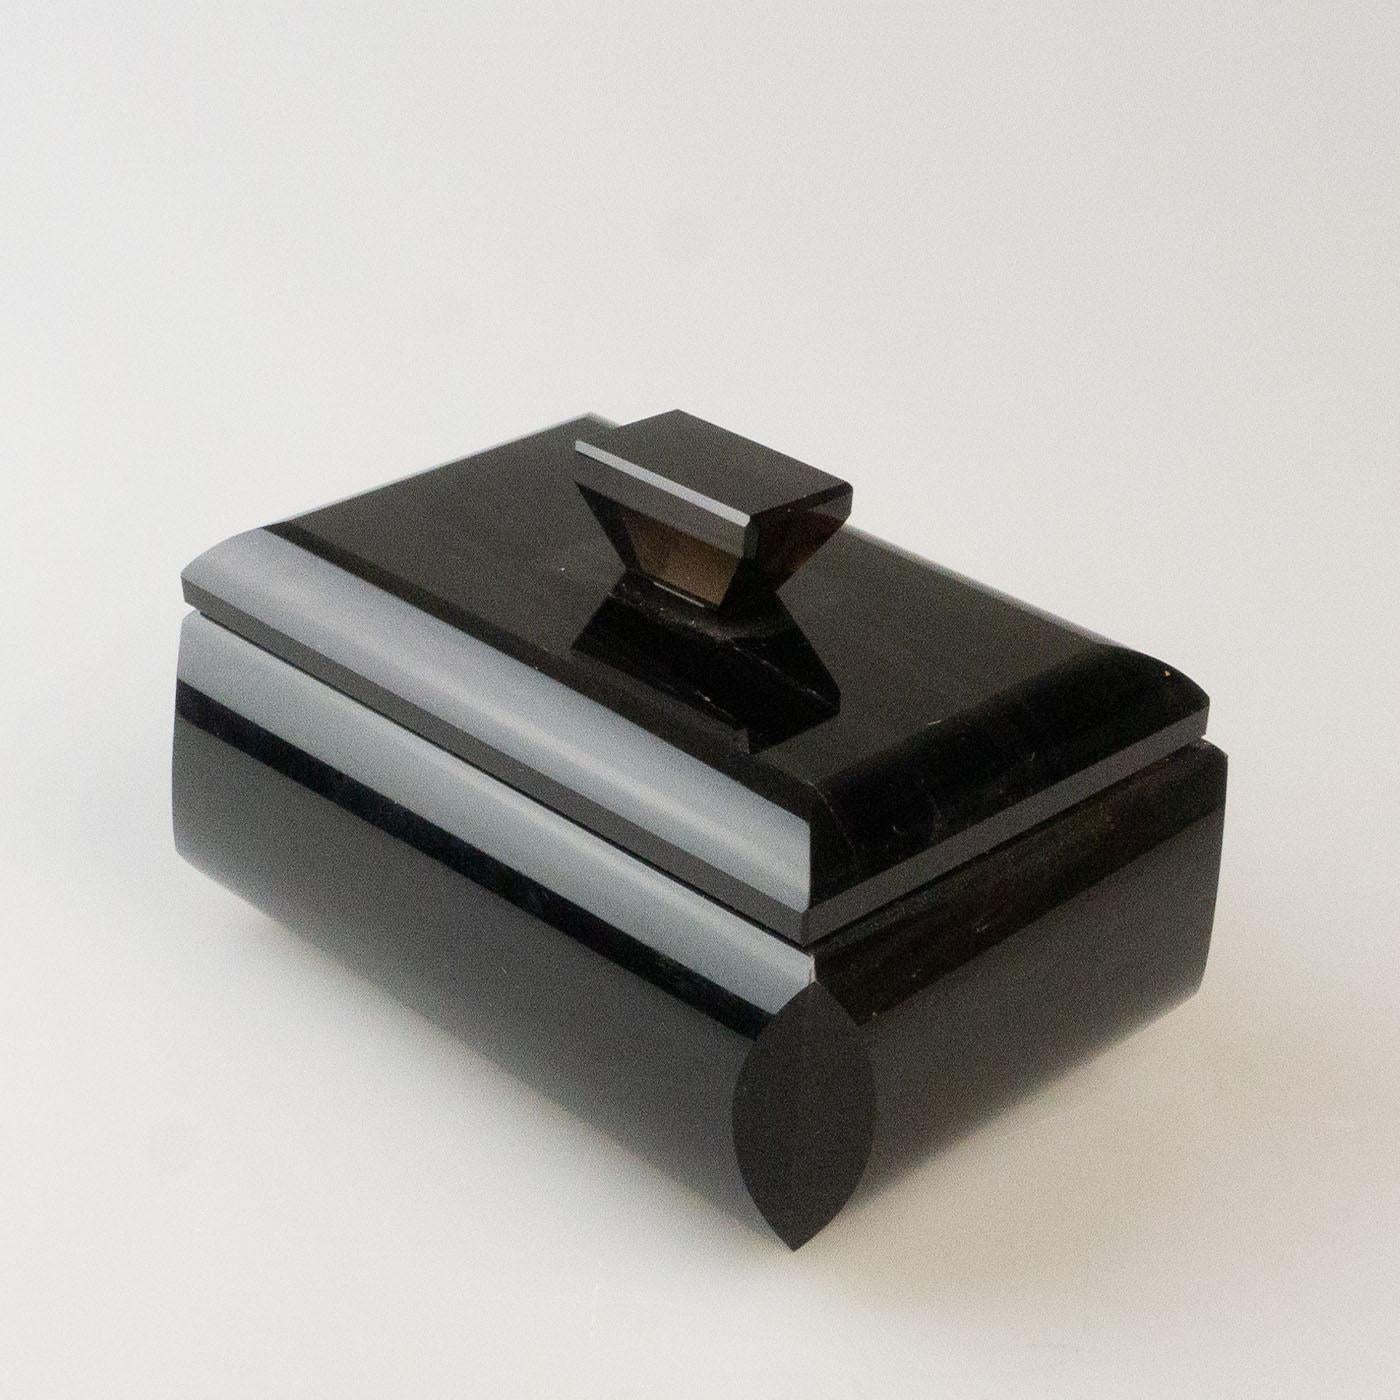 Rectangular box made of solid black Obsidian consisting of a base and a lid with a knob for easy opening. The interior of this geometric jewelry box is lined with soft taupe velvet for storing your jewelry. Obsidian is a volcanic glass found in